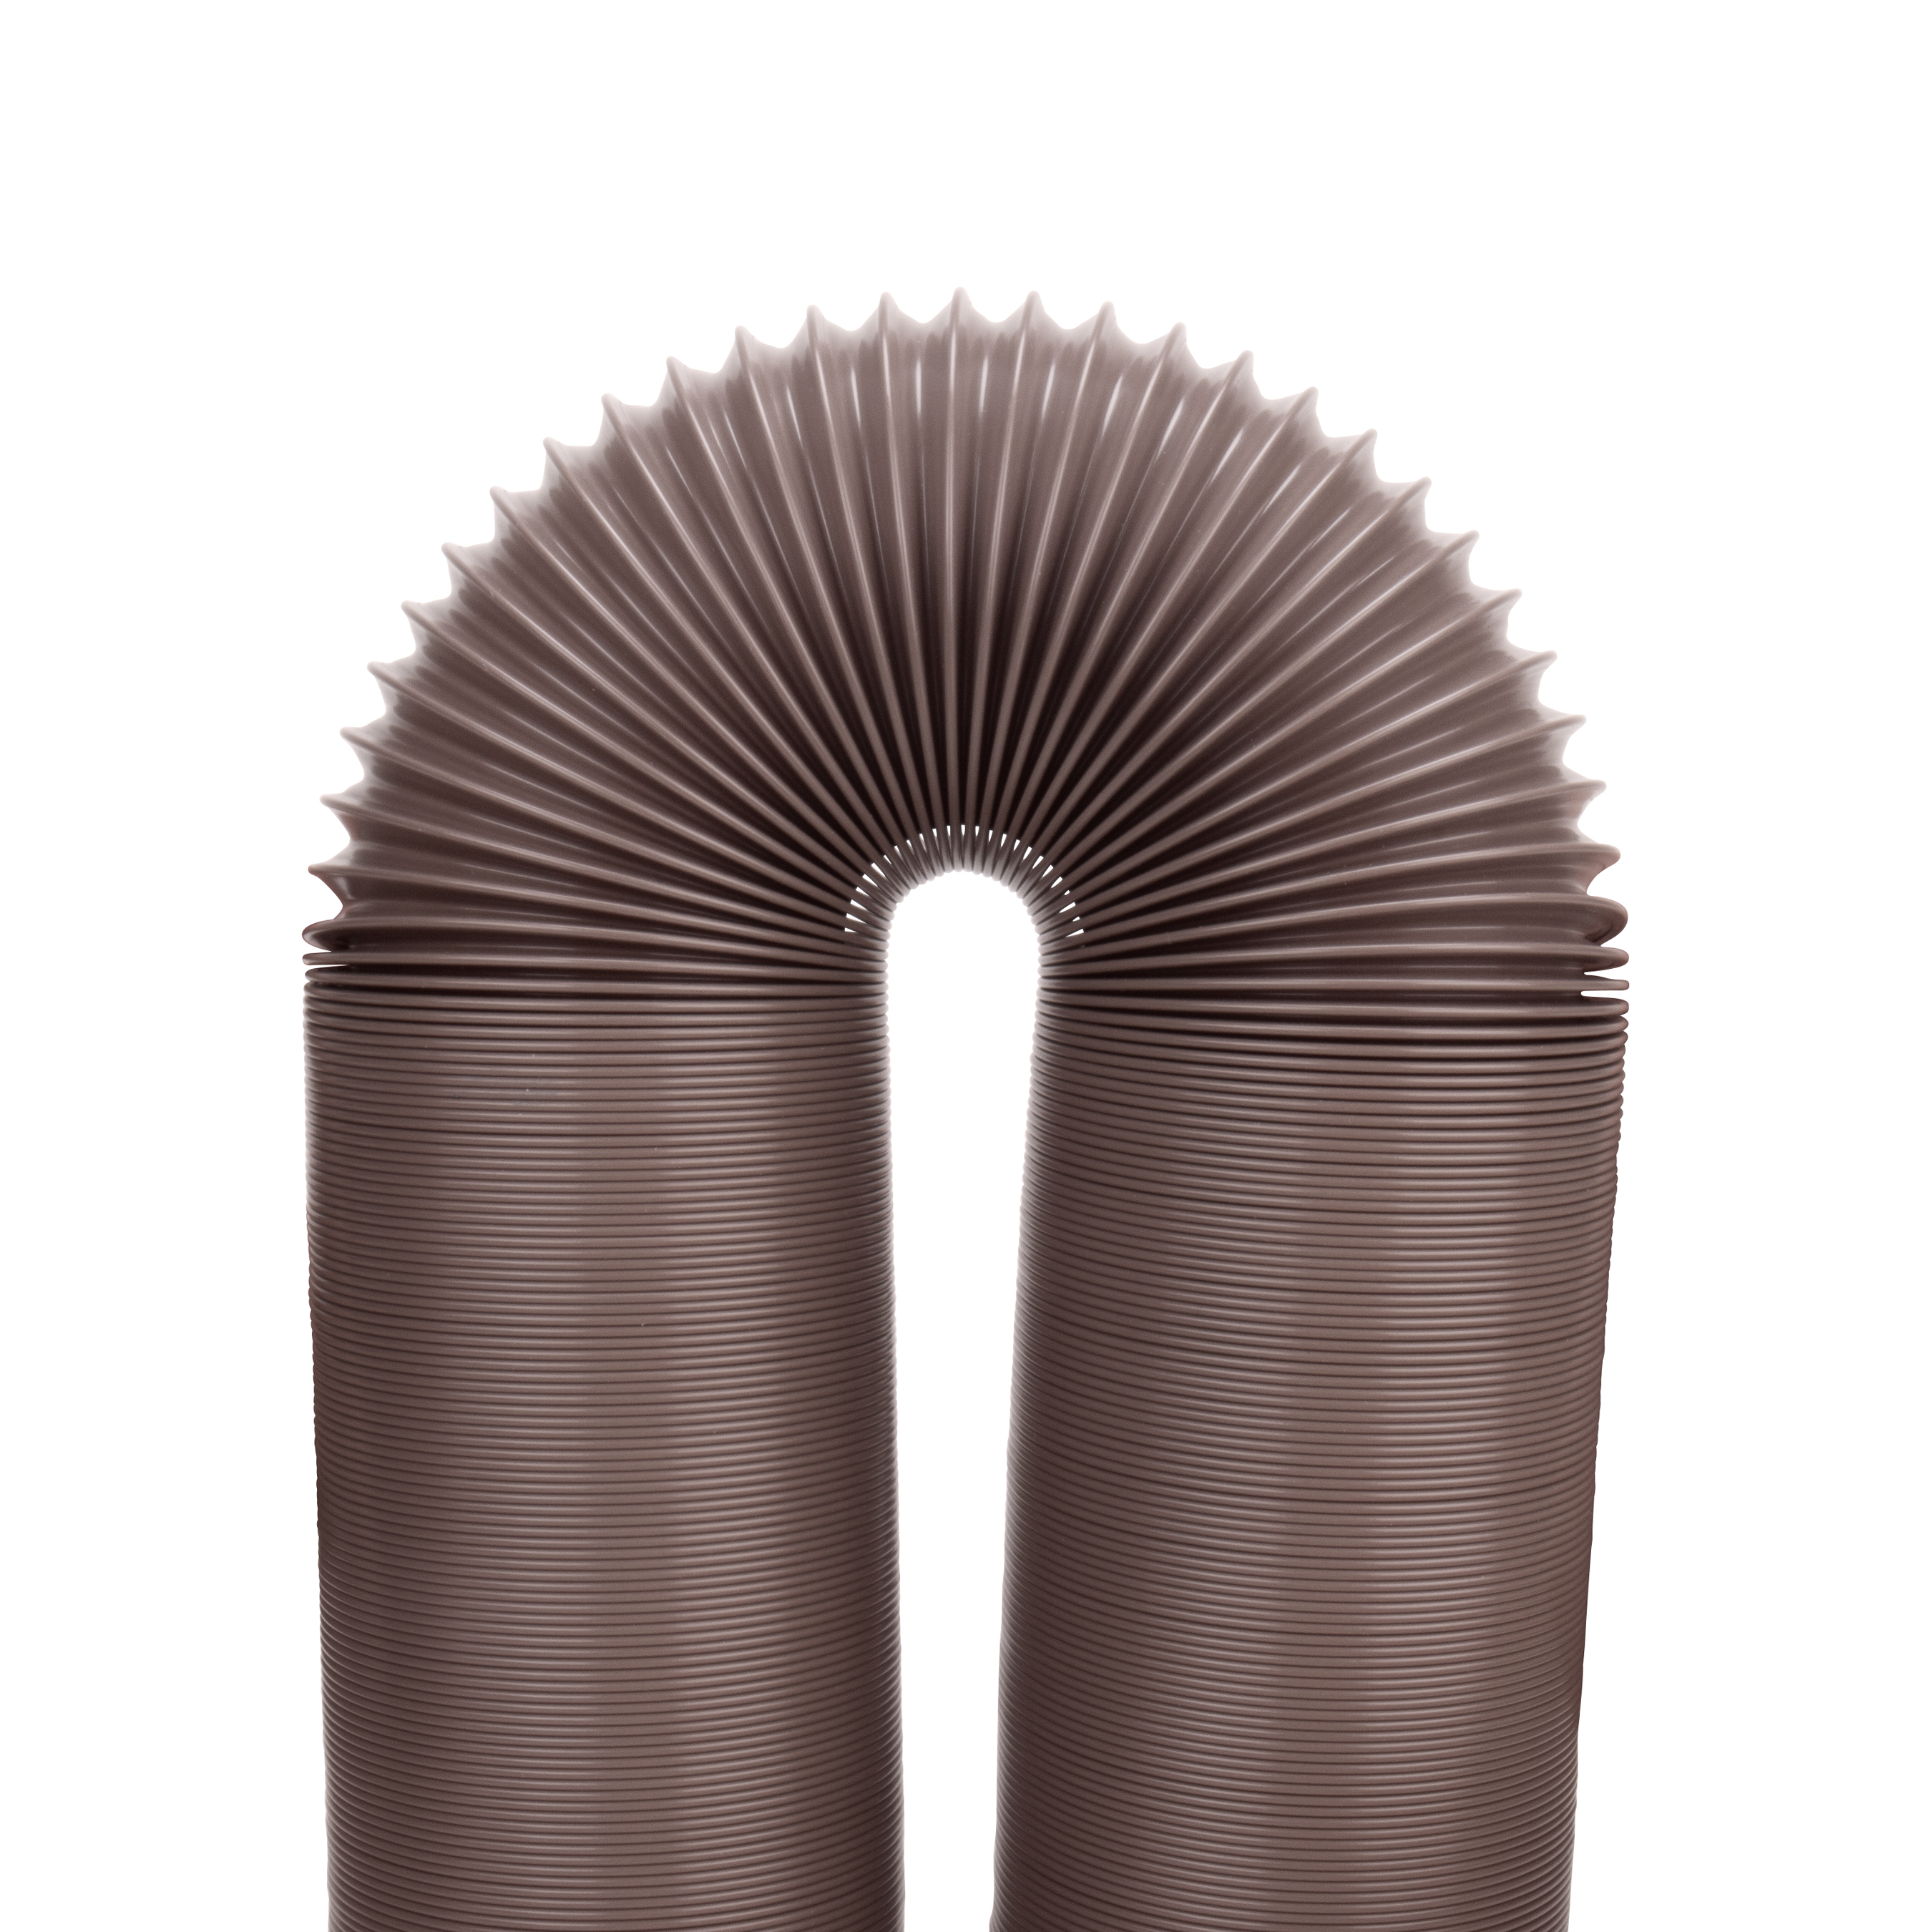 Camco 20-Foot RV Sewer Hose - Brown, 15 Mils of HTS Vinyl (39631) - image 3 of 5